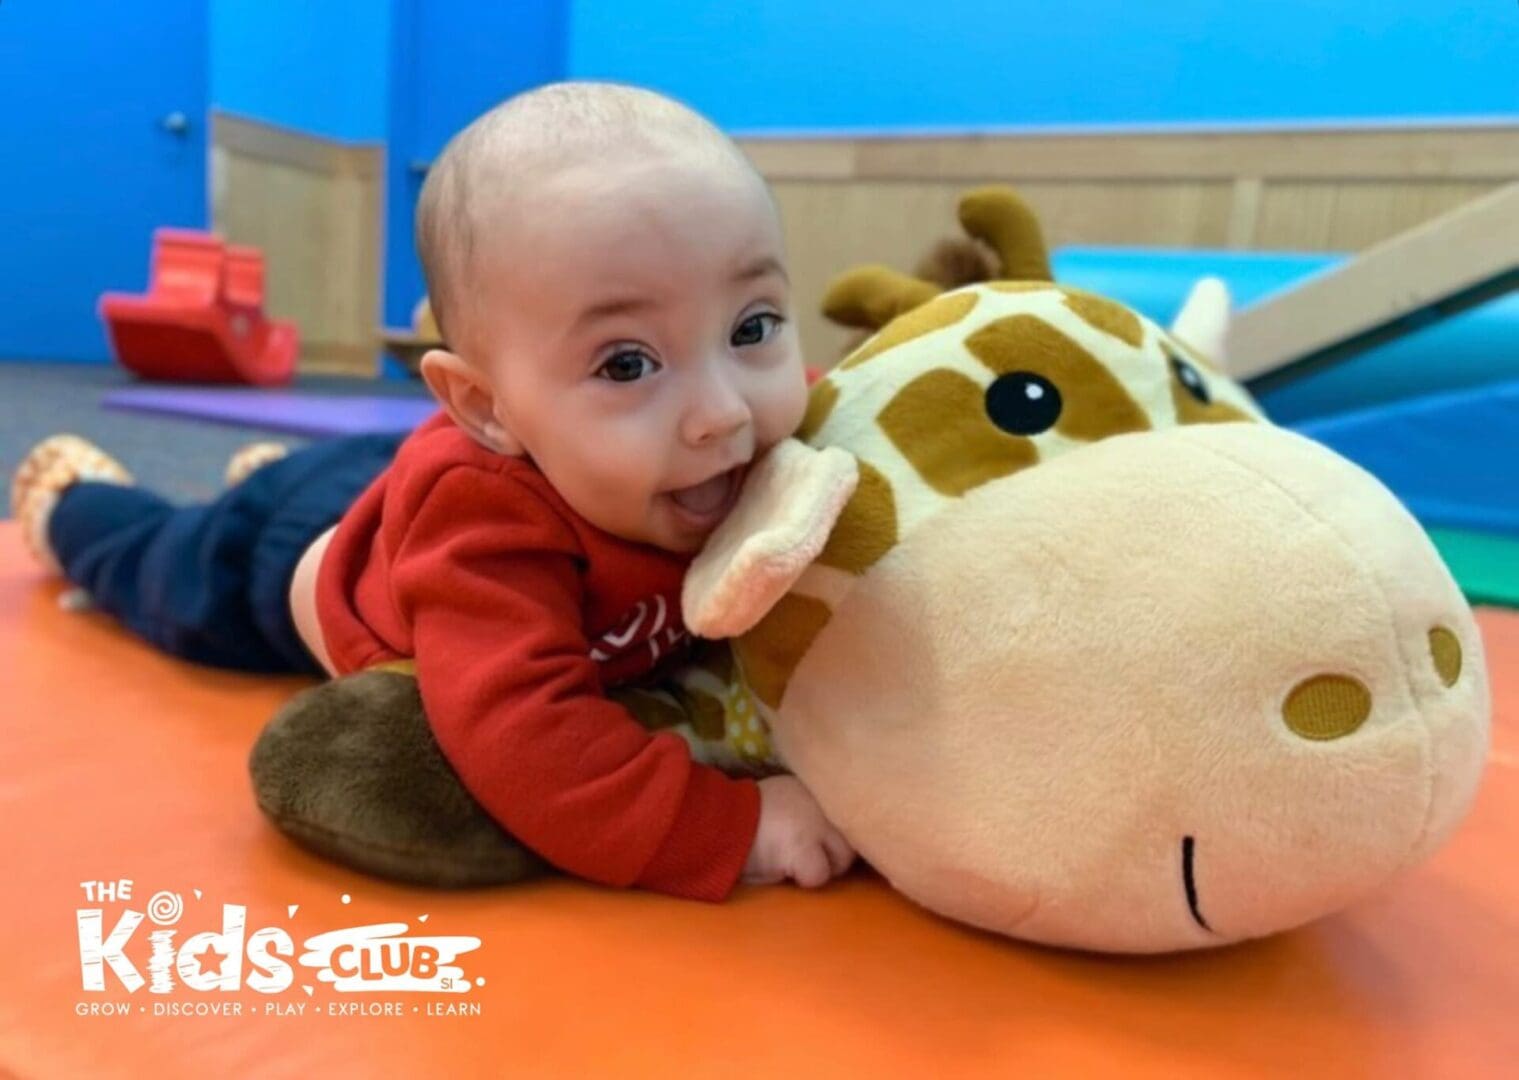 Baby enjoying himself at mommy and me on Jax the Giraffe: The official mascot of The Kids Club of SI